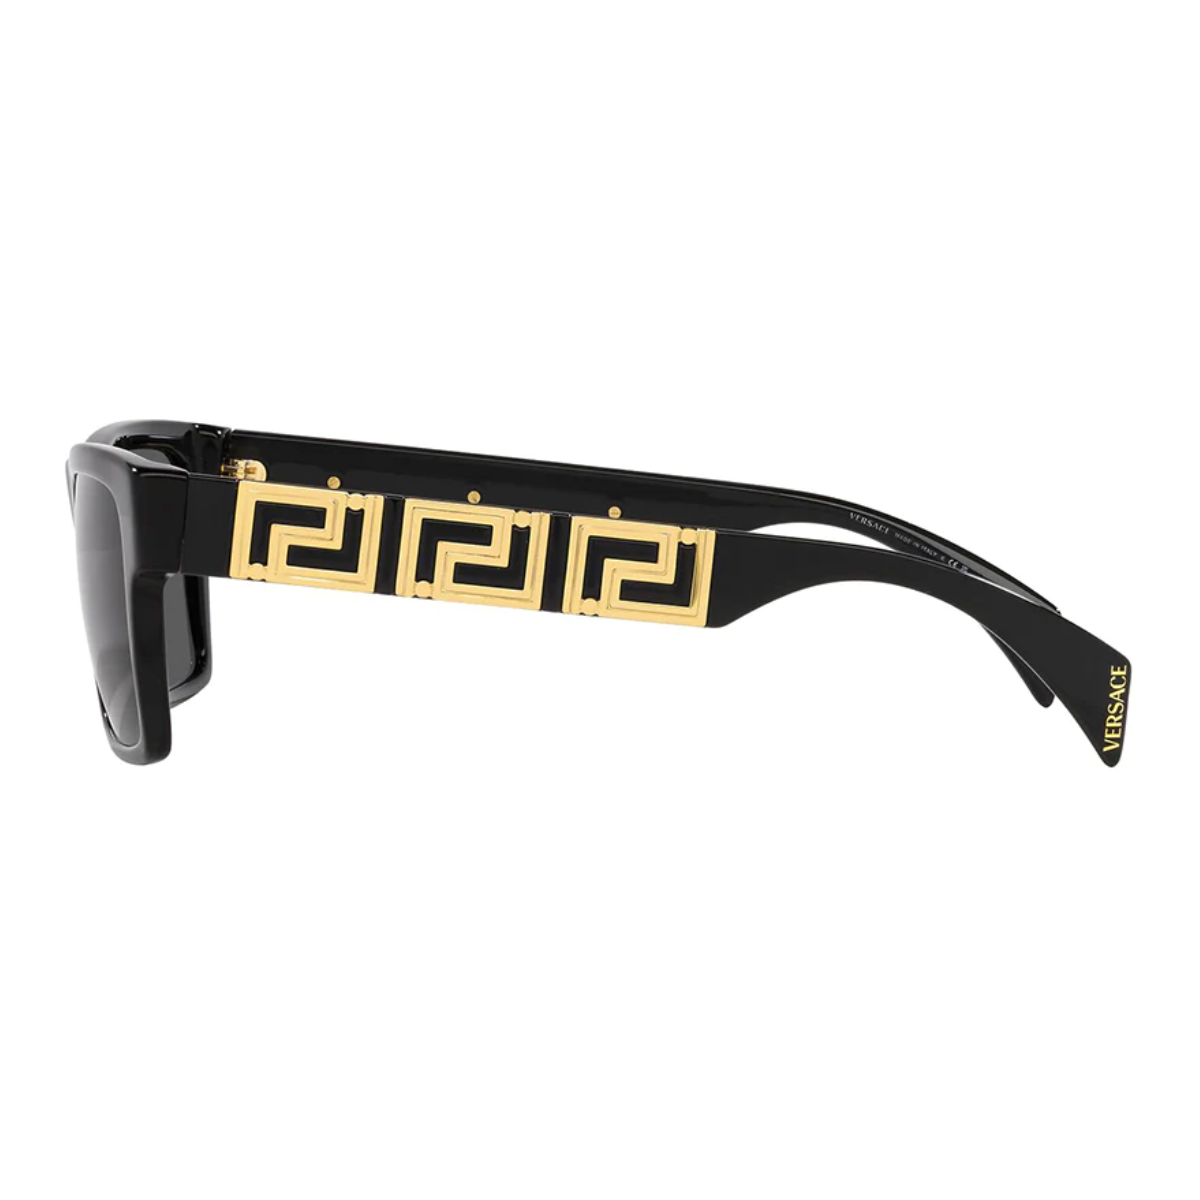 "Display of Versace 4445 108/87 54 men's sunglasses with emphasis on the luxurious design and craftsmanship, part of Optorium's exclusive collection of designer shades. at optorium"